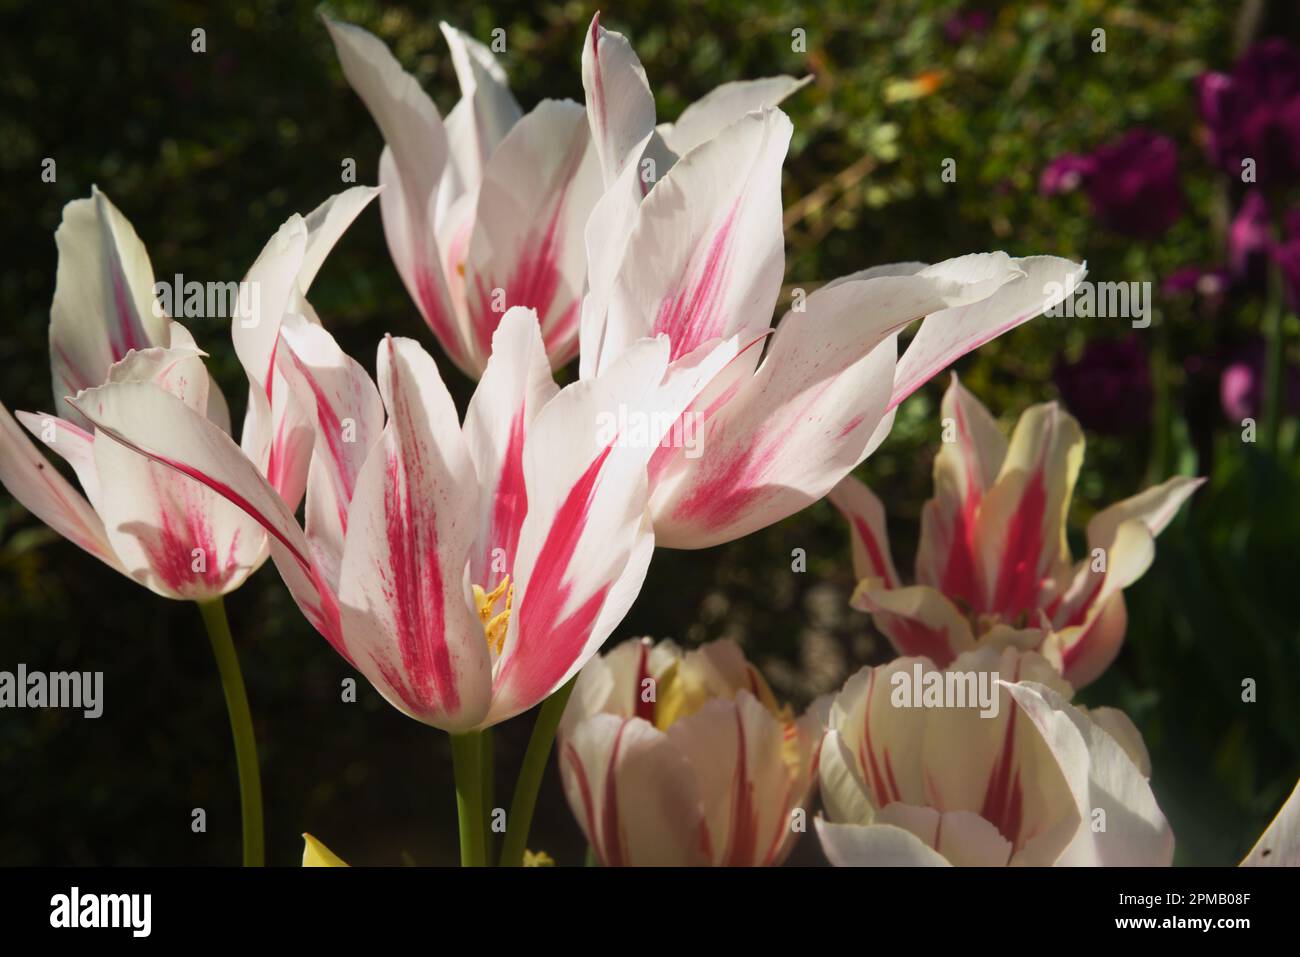 Tulip blossom, signifying spring with mother nature's hand in beasuty and elegance. Garden setting, rich in color & life. Stock Photo